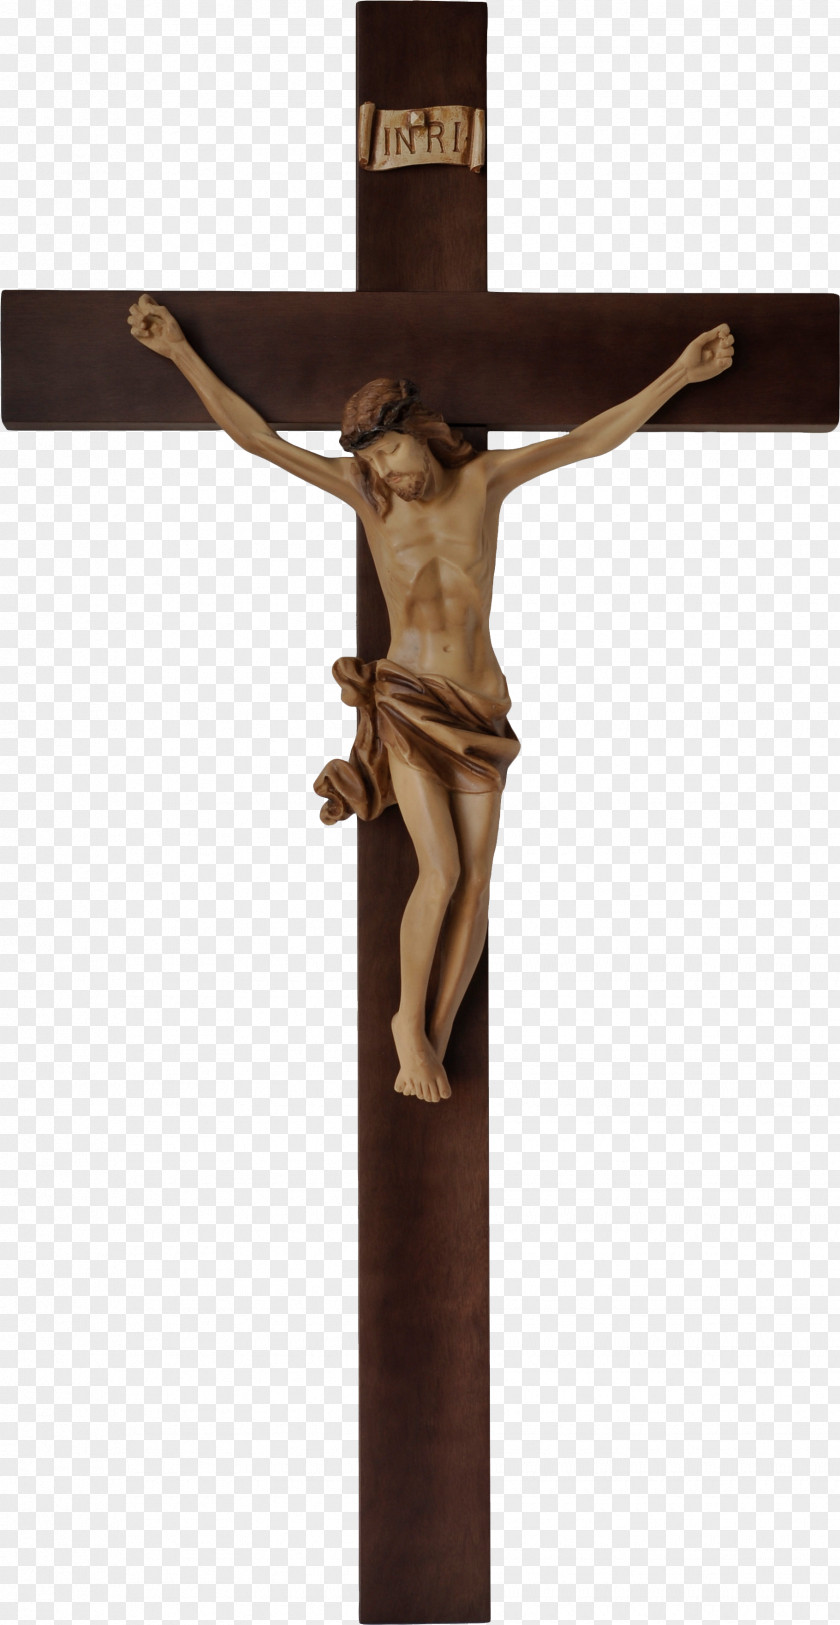 Christian Cross Crucifix Wall Christianity Jesus, King Of The Jews PNG